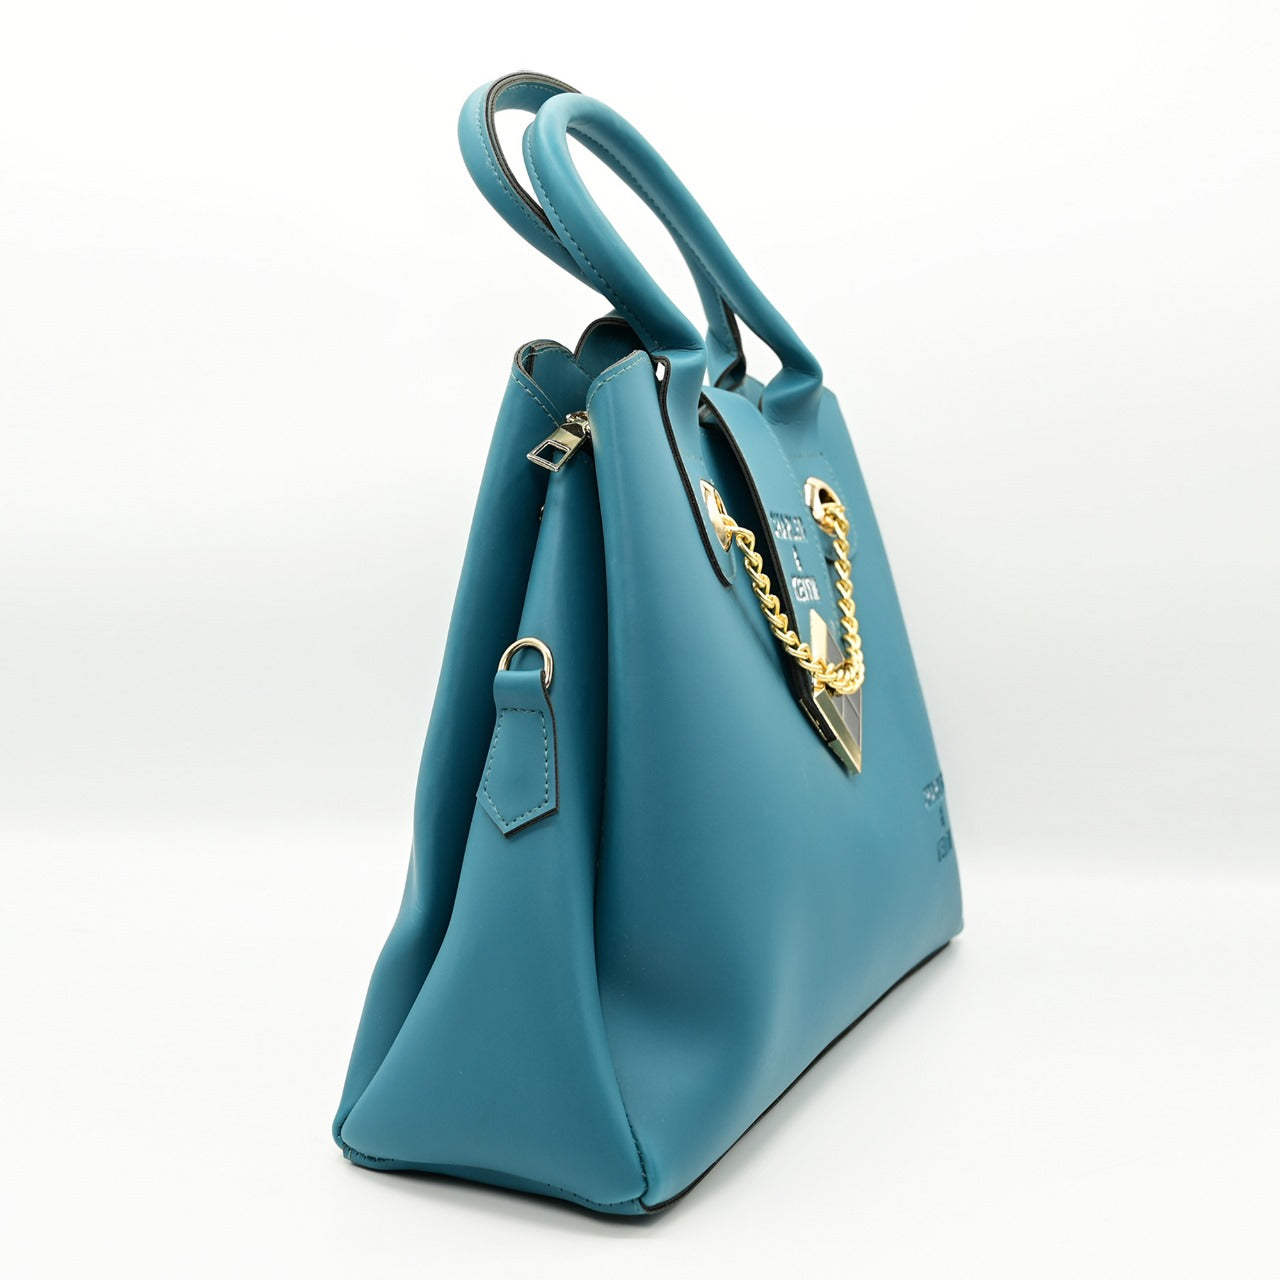 Imported Bag Article in Light Blue Colours Code 7